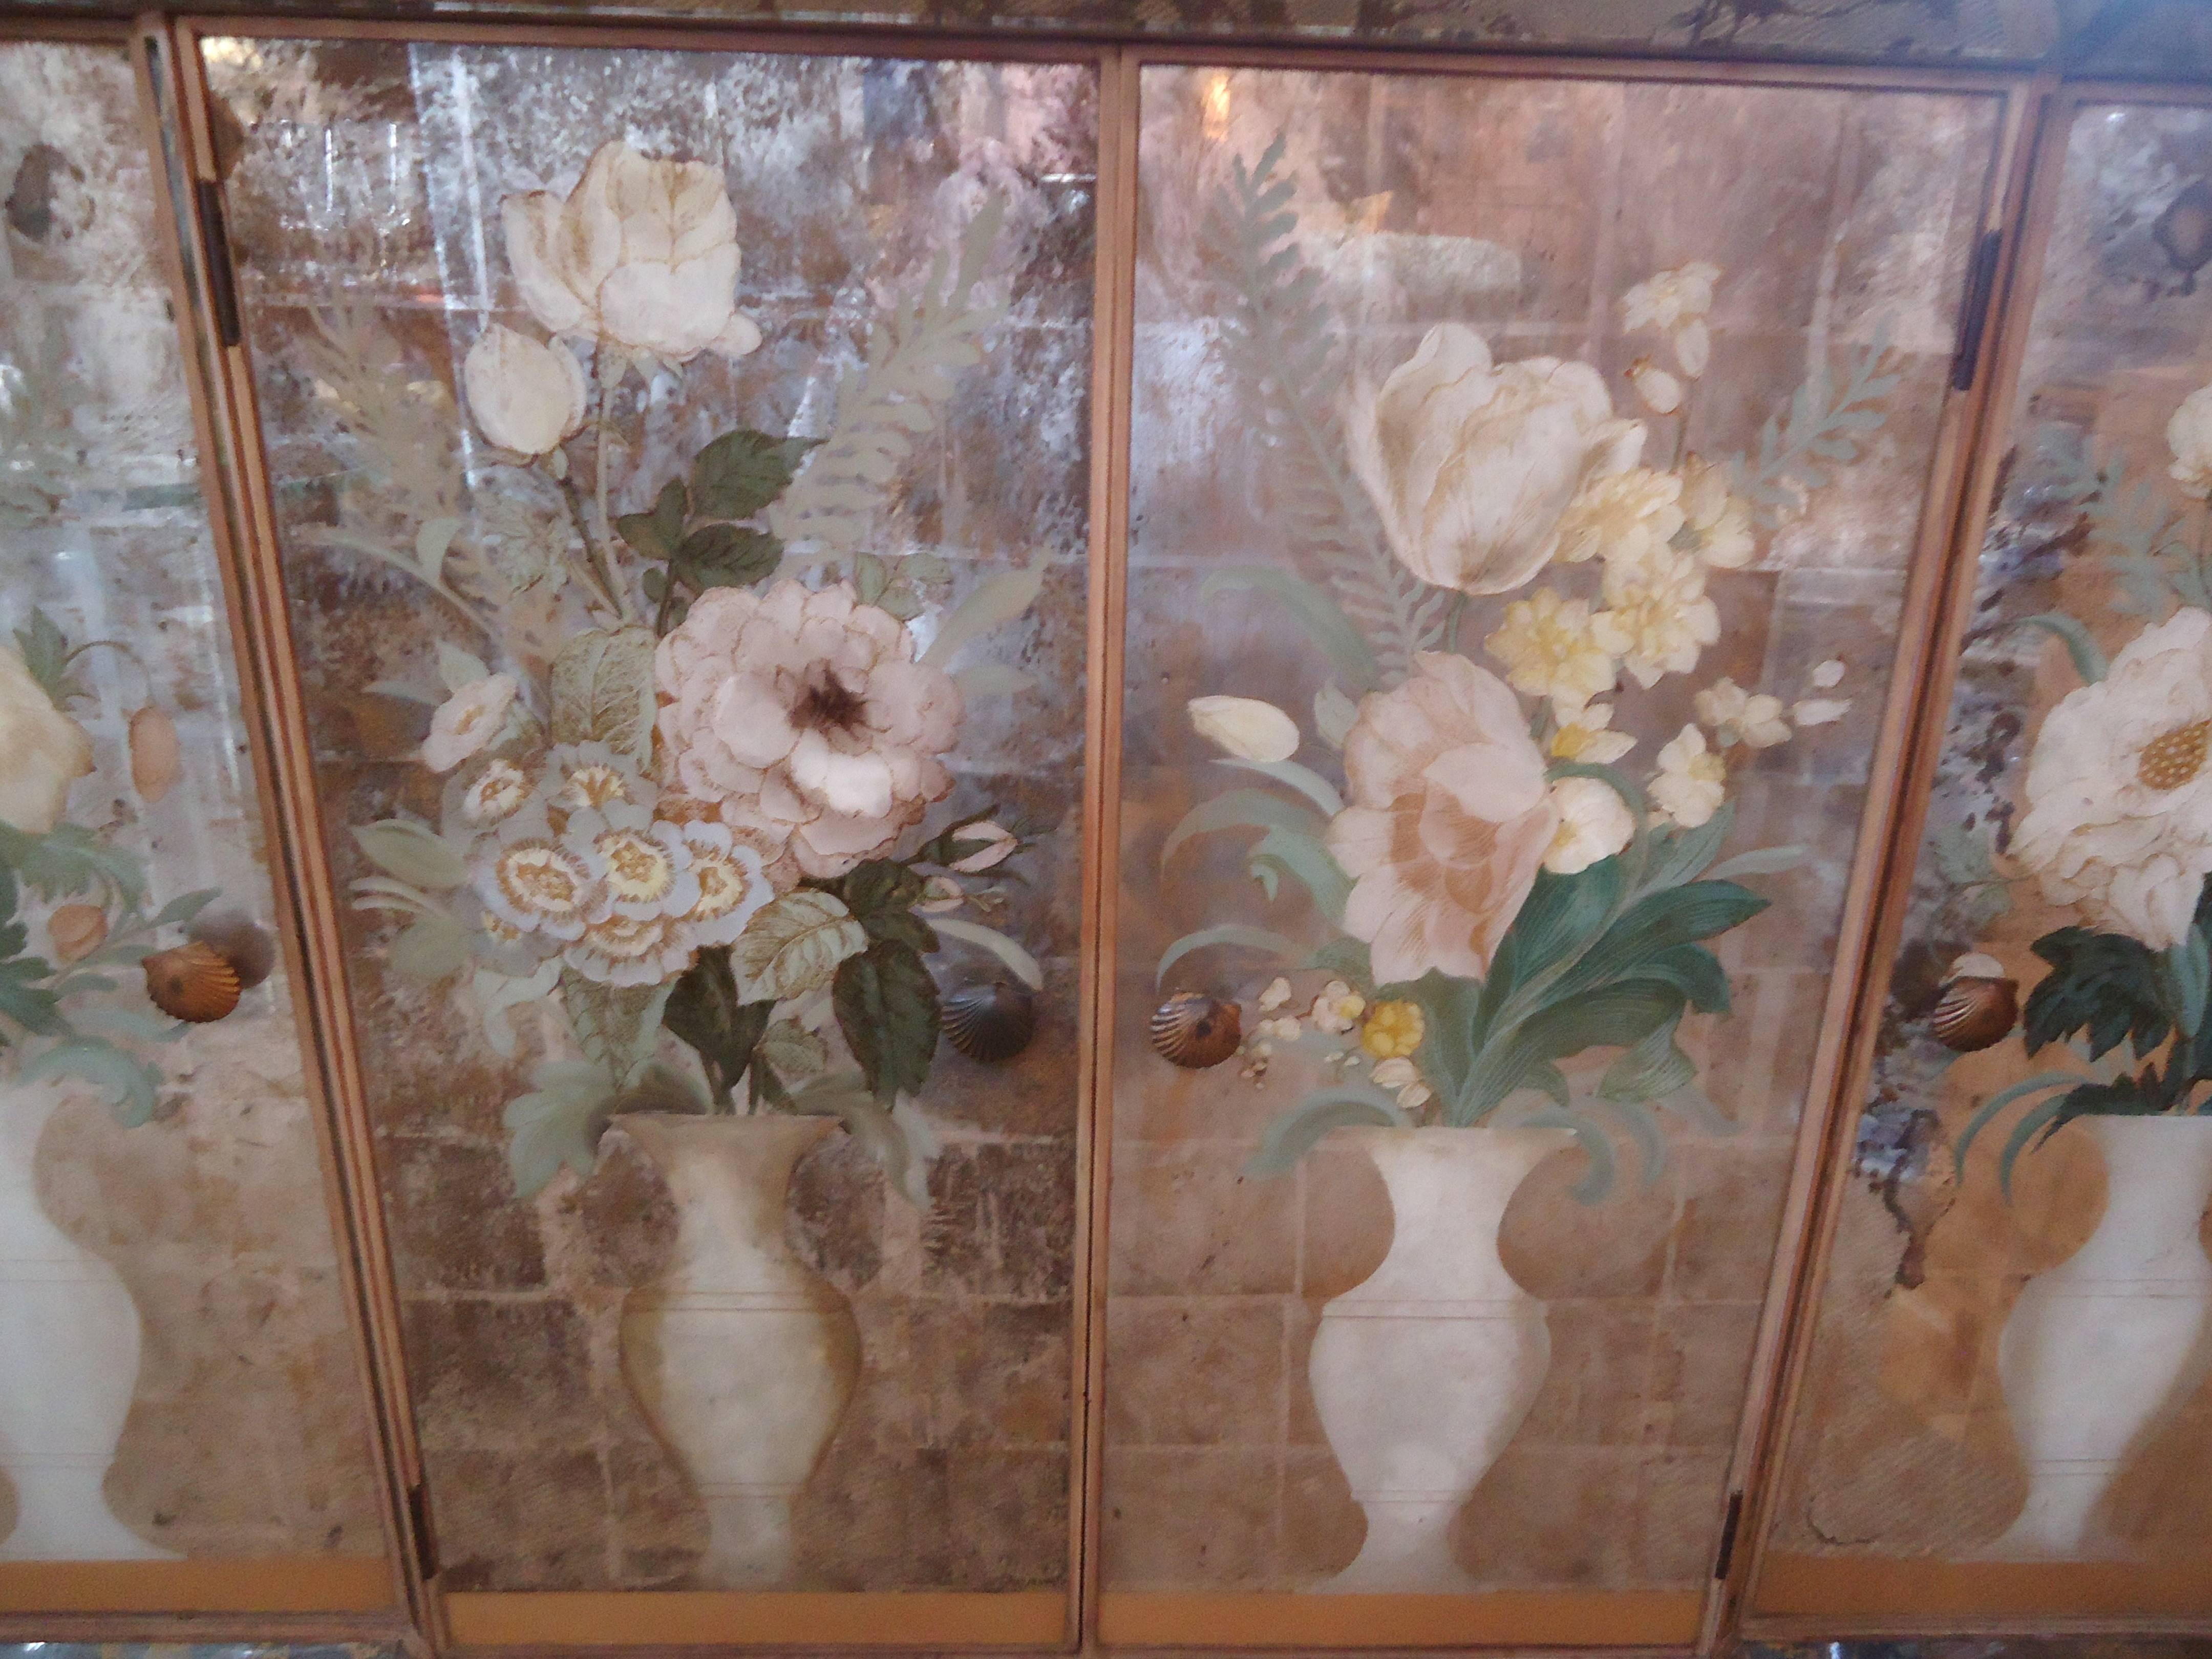 Magnificent reverse painting on glass (églomisé) of four white vases with lovely pale floral bouquets, silver leaf and mirror add glitz and glamour to this narrow credenza. Four doors with lots of storage within. Lovely bronze knobs in the shape of